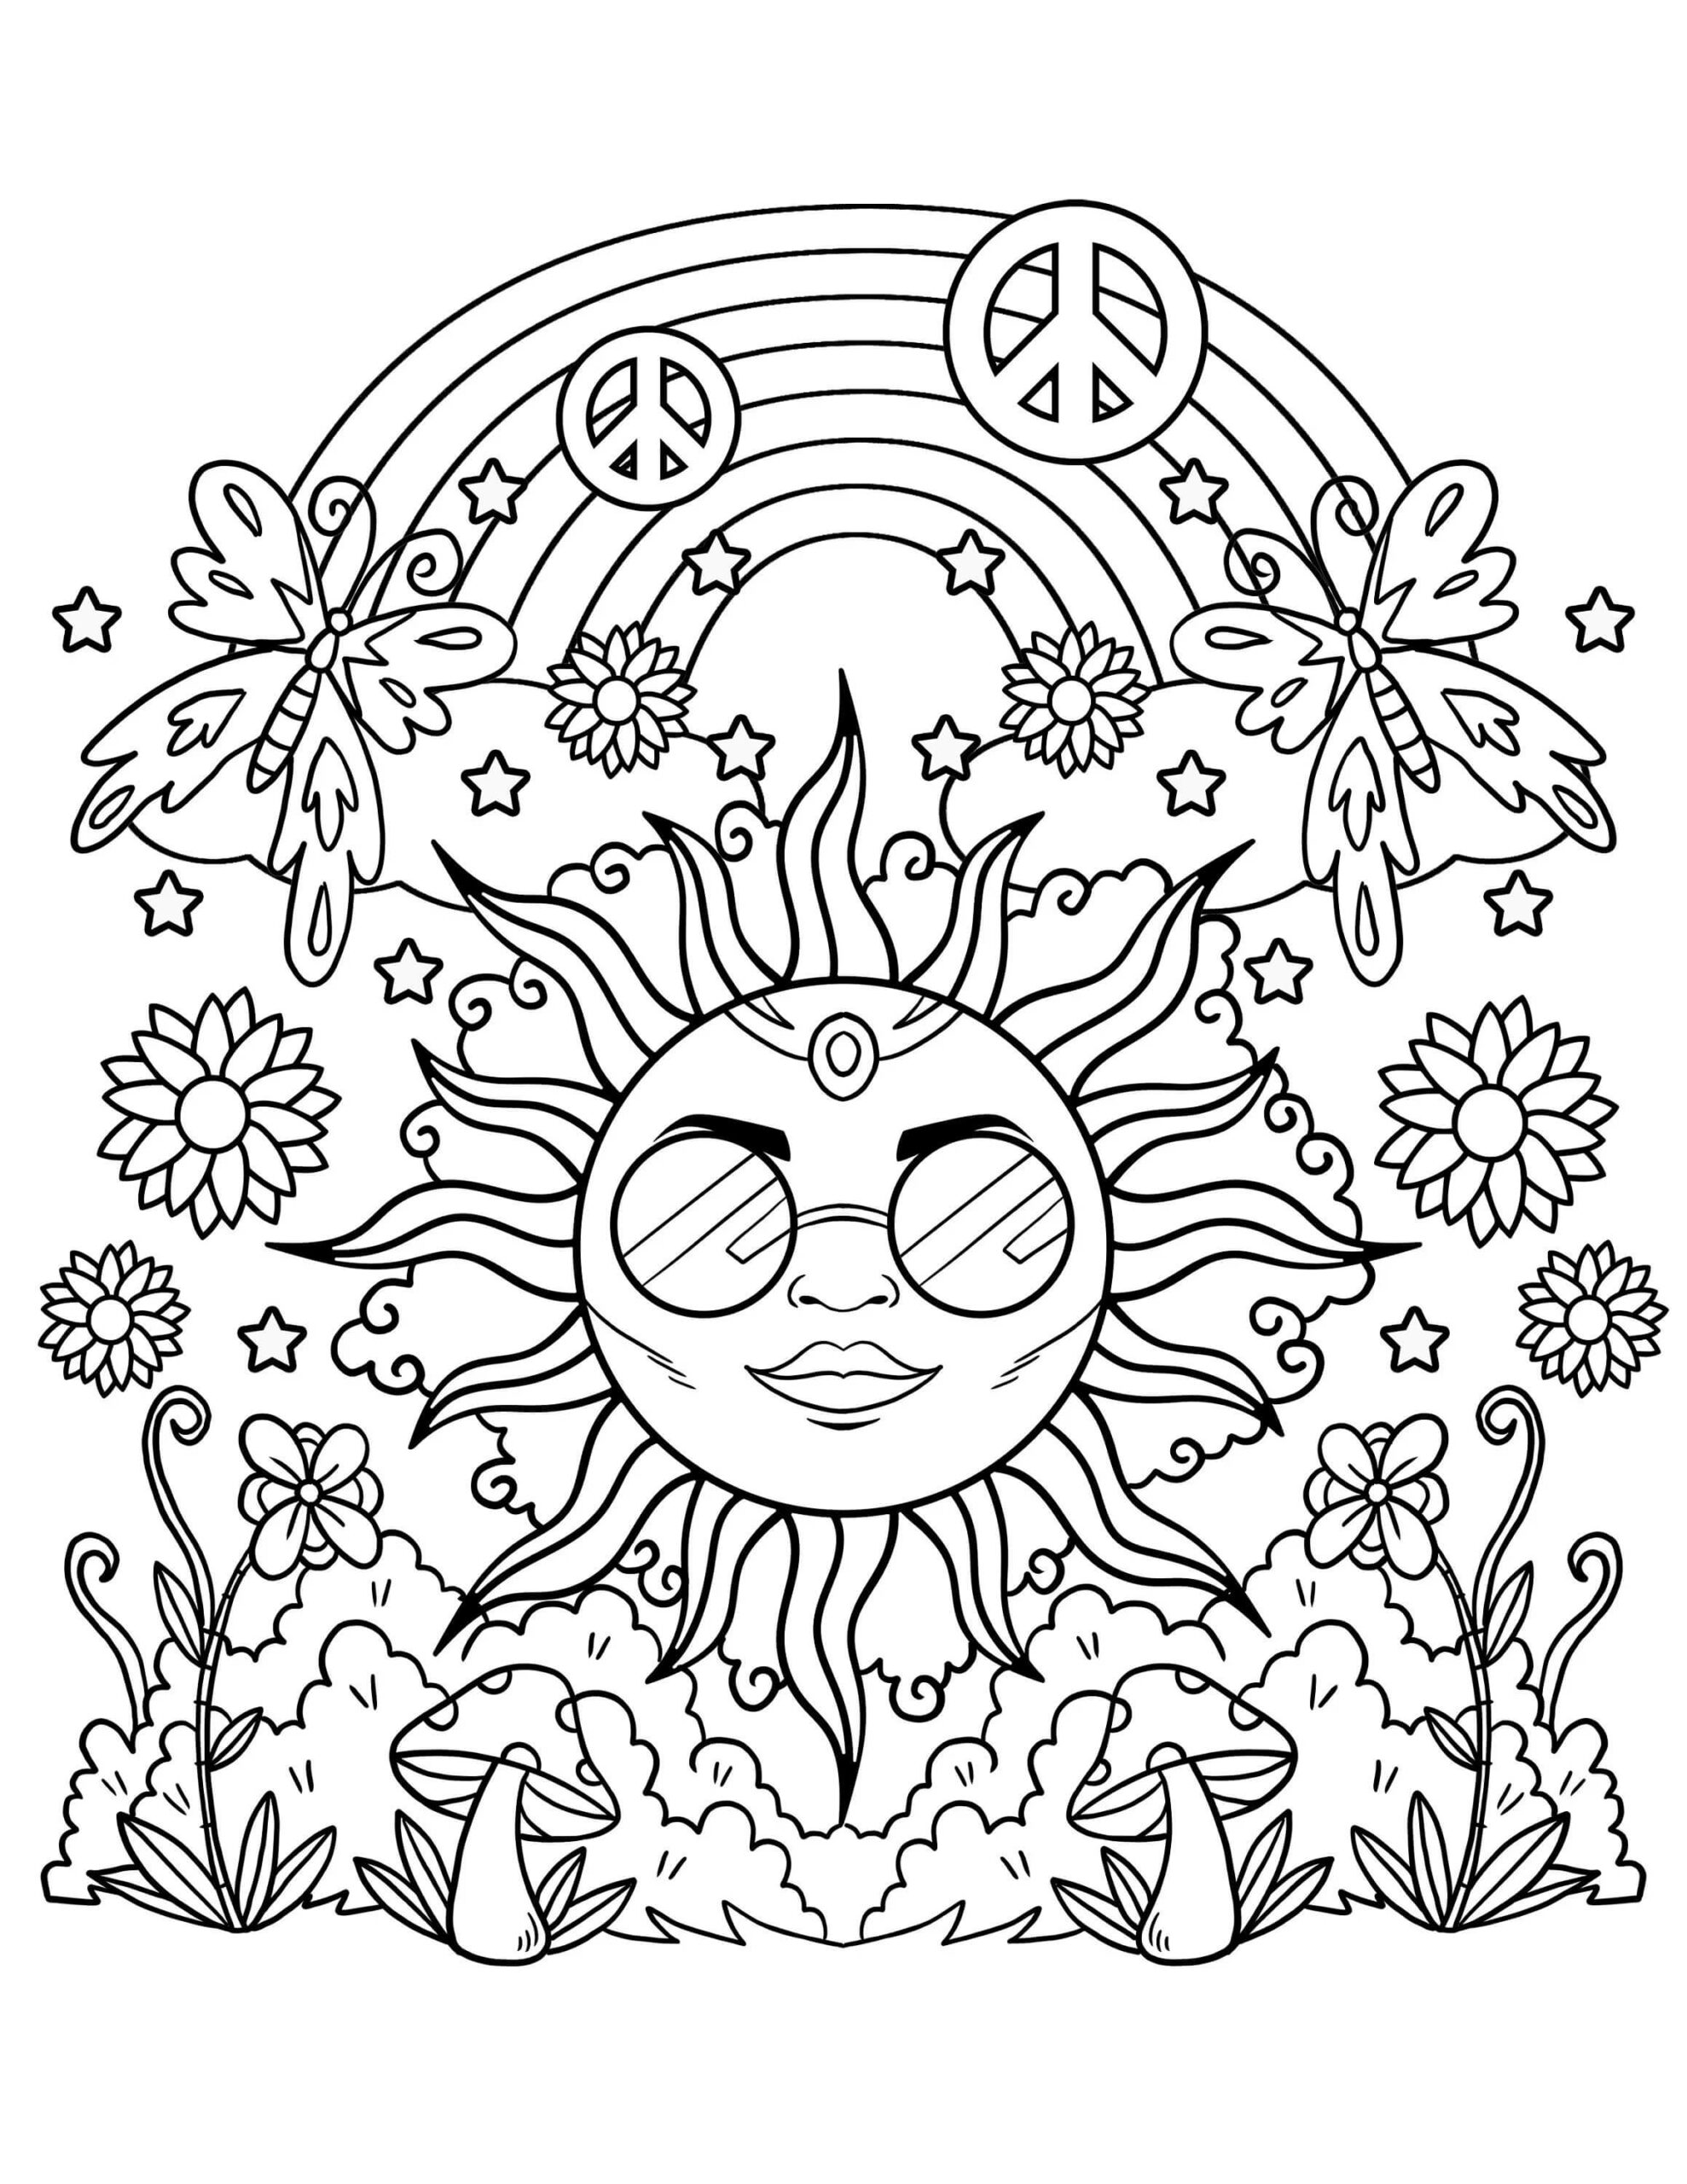 Cool sun with rainbow trippy coloring page